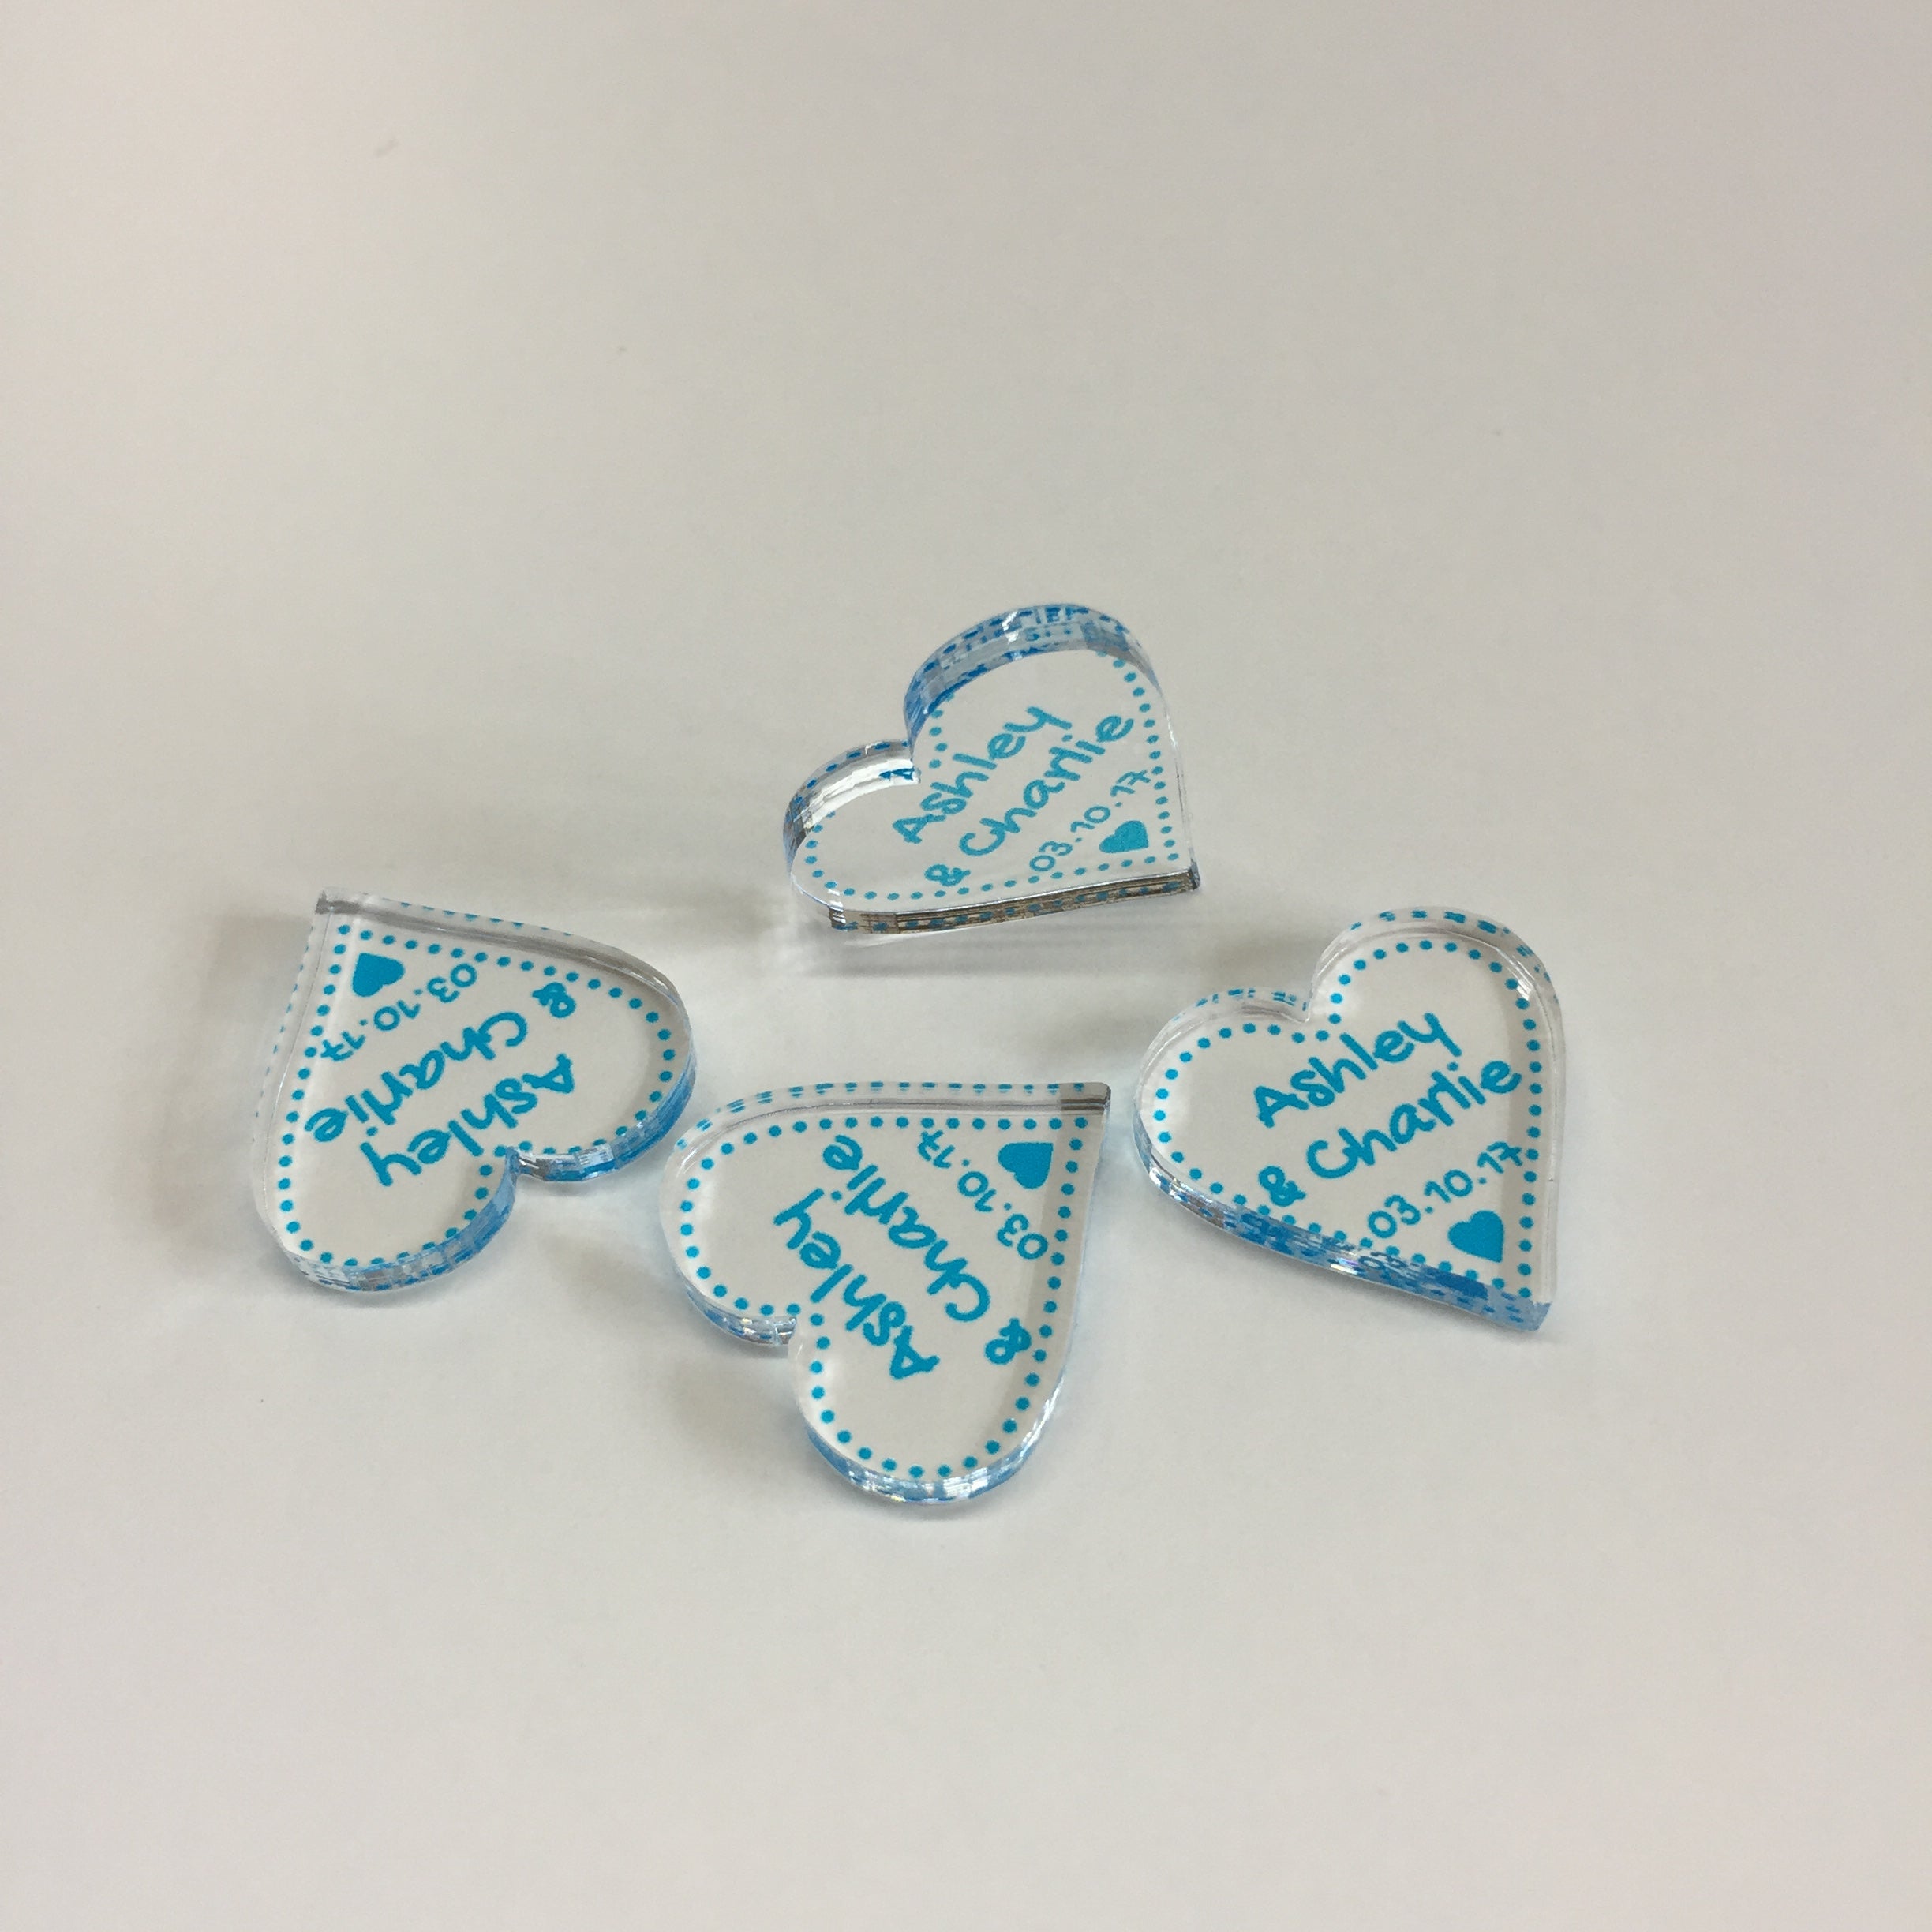 Personalised Wedding Favours - Clear Acrylic + Bright Blue Acrylic Love Hearts